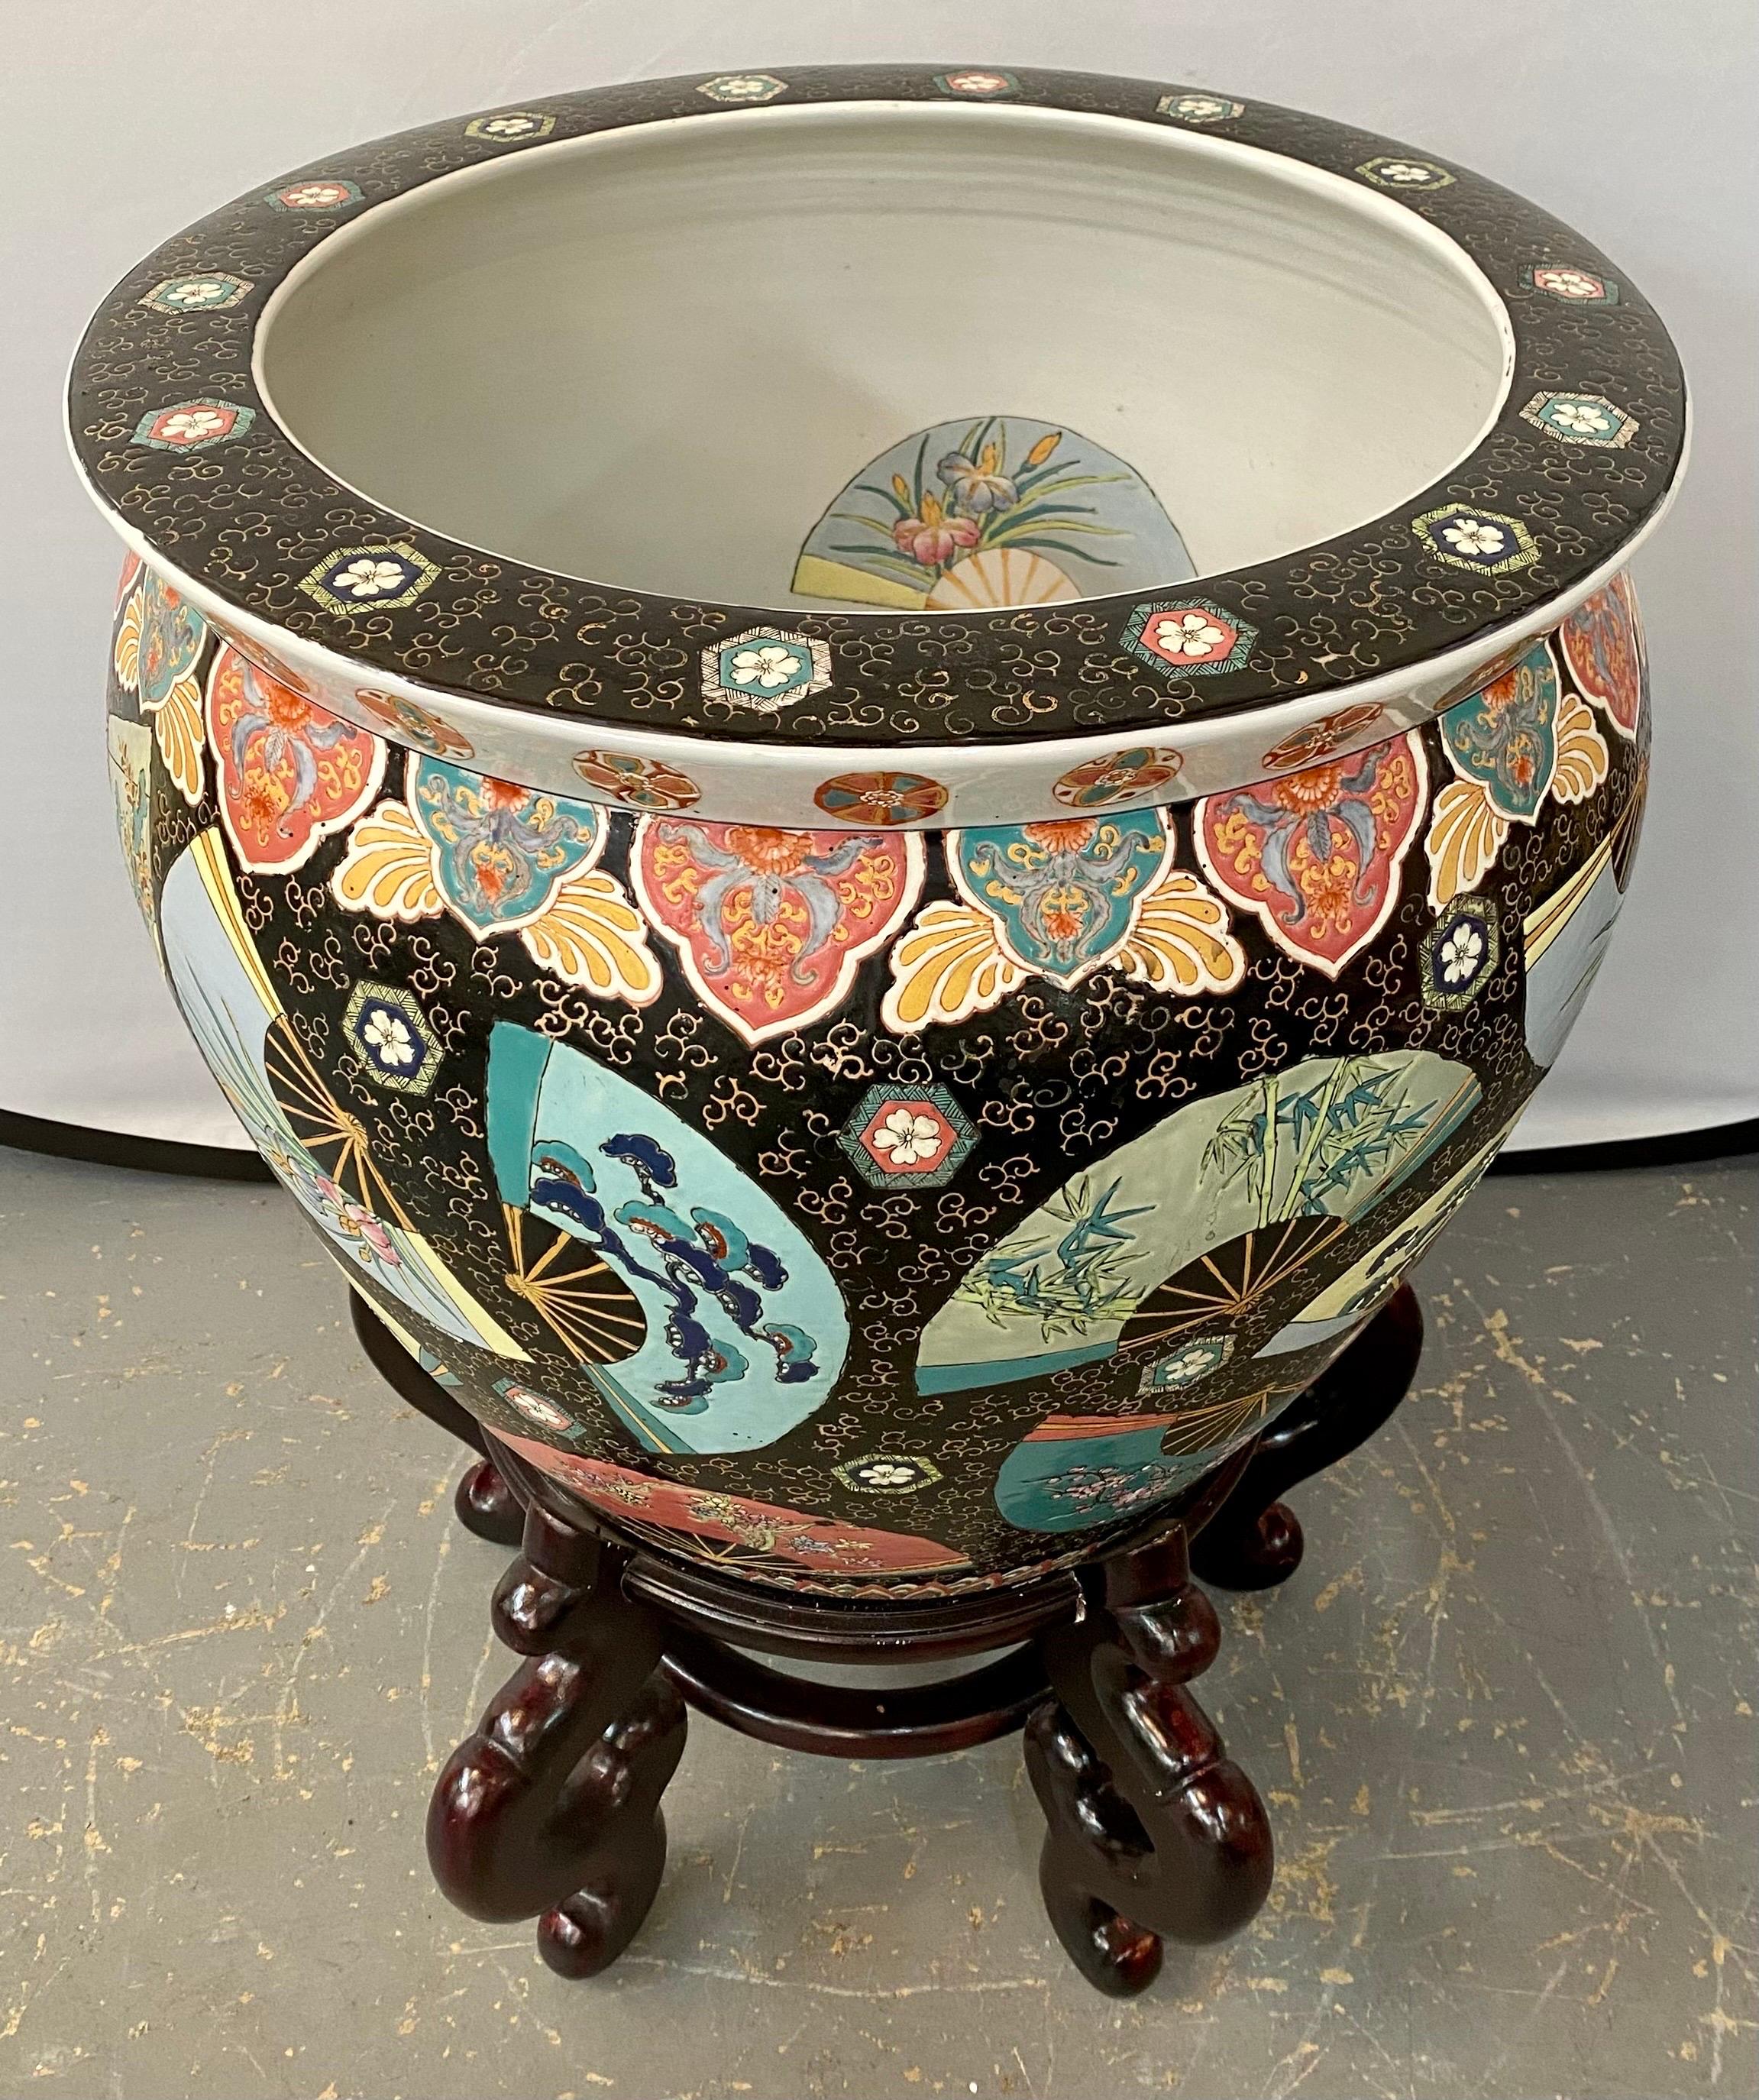 
Elevate the ambiance of your indoor or outdoor living space with a touch of Oriental charm courtesy of the Chinese Ceramic large fishbowl jardiniere or planter. This exquisite piece of craftsmanship seamlessly marries artistry with functionality,